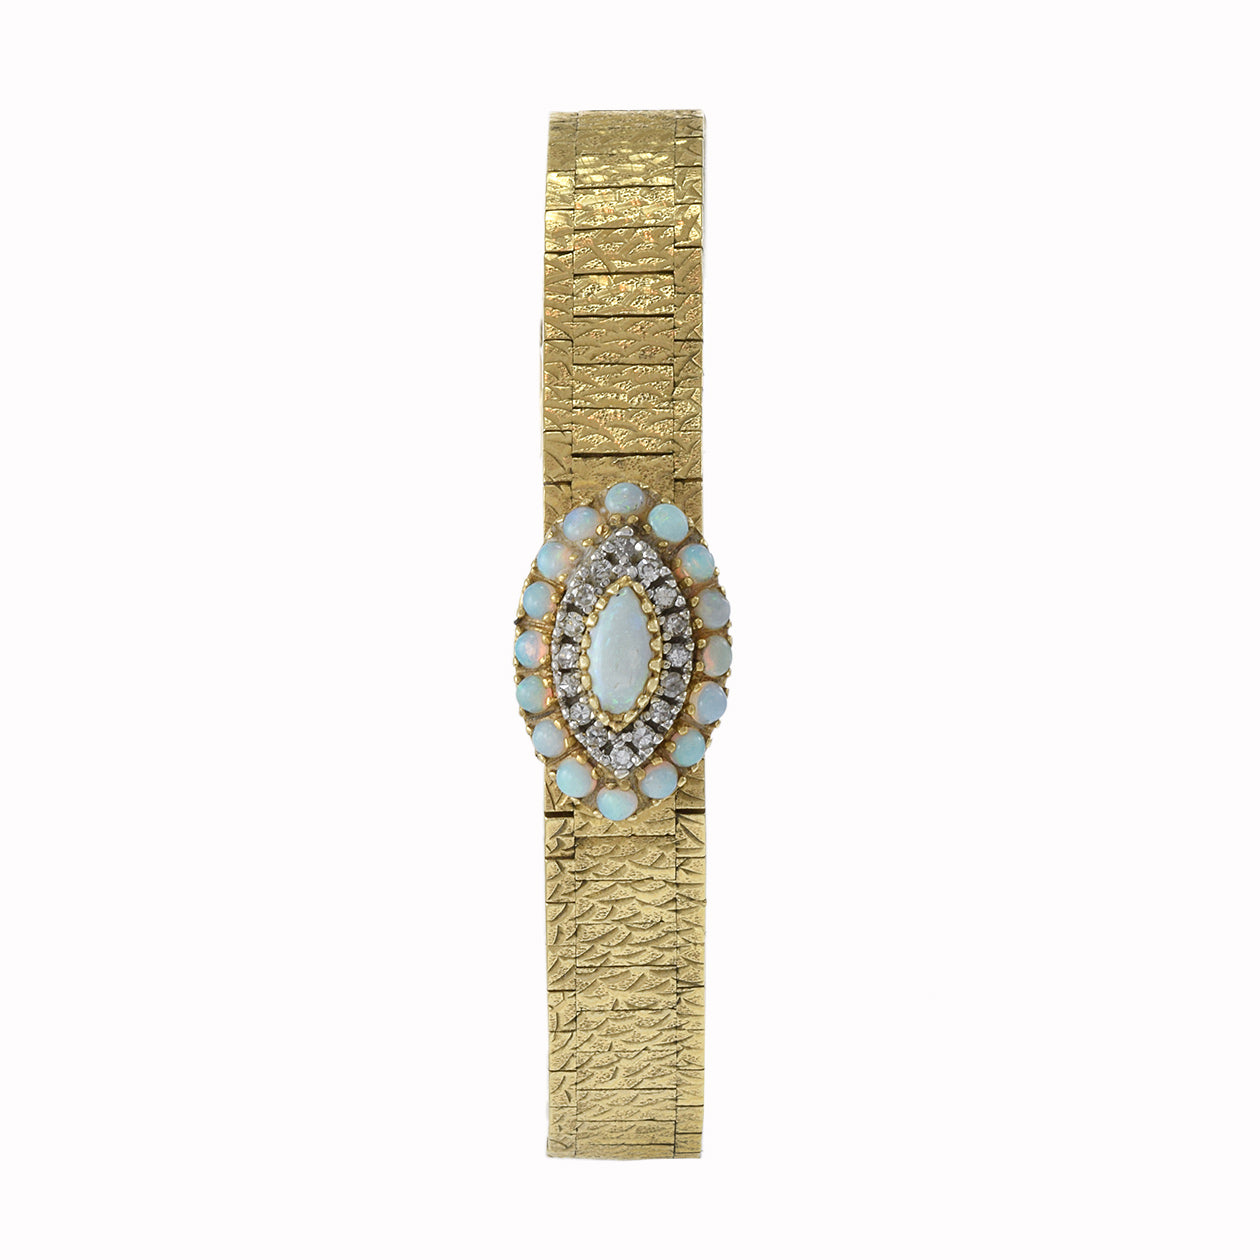 North Star 1960's Opal and Diamond Cocktail Watch